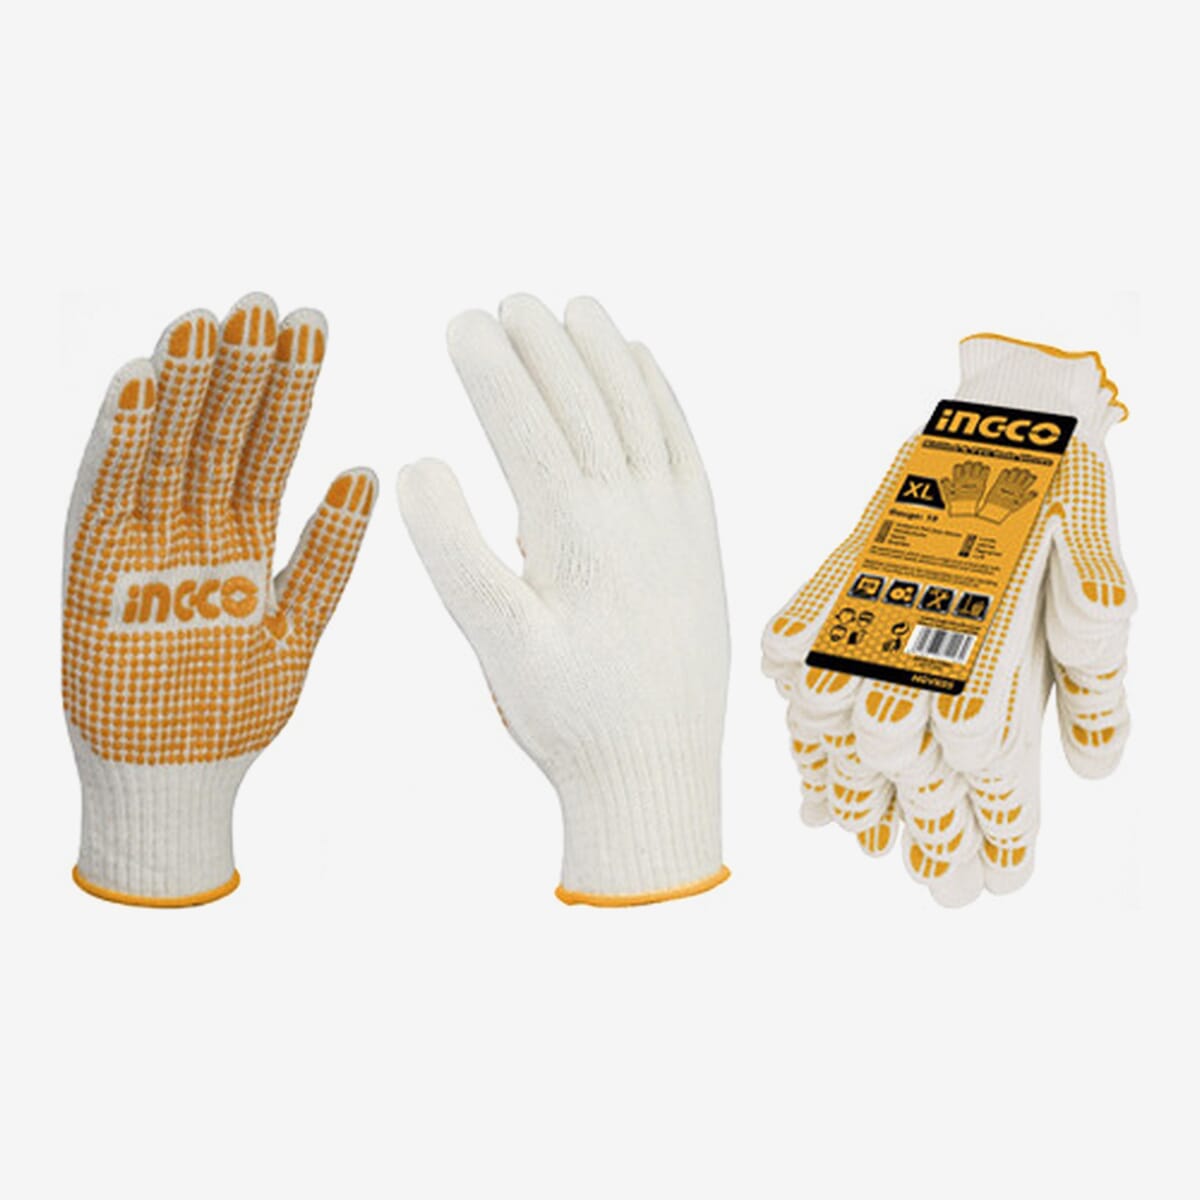 Ingco Knitted & PVC Dots Gloves - HGVK05 | Buy Online in Accra, Ghana - Supply Master Work Gloves Buy Tools hardware Building materials